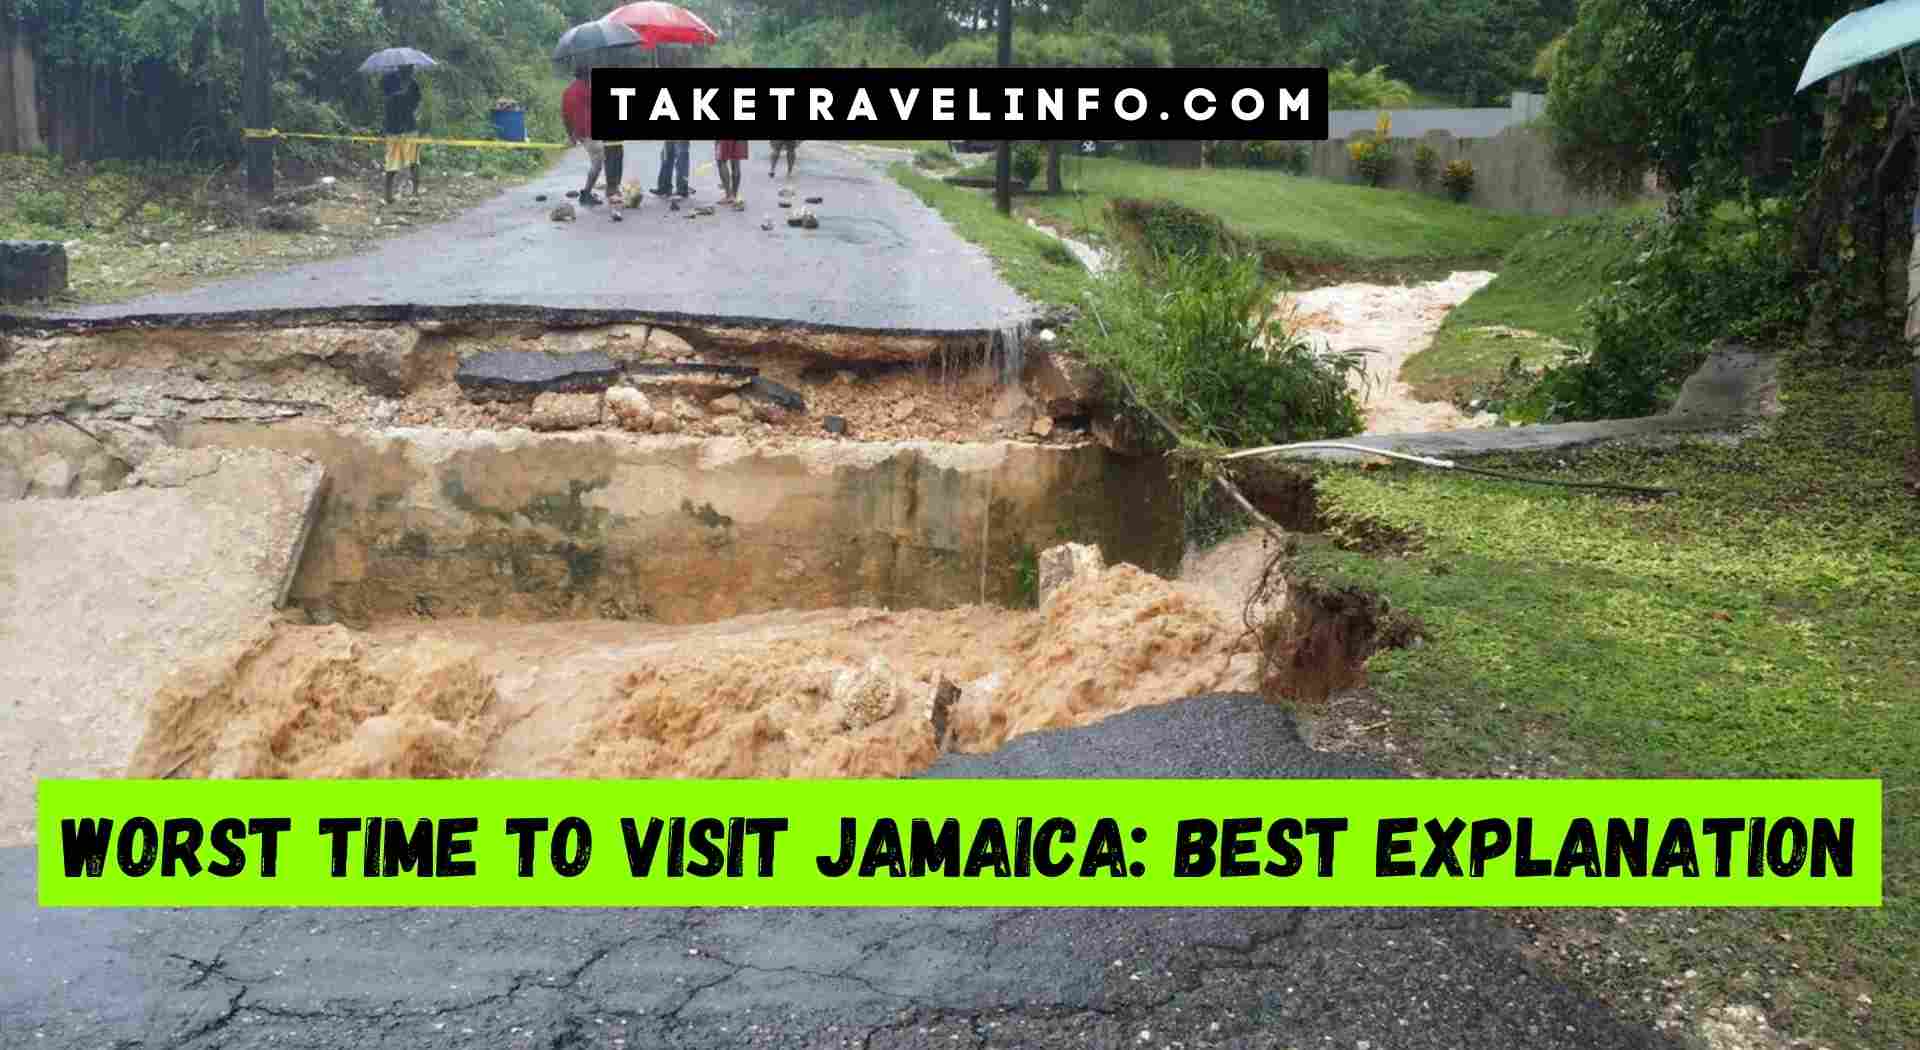 Worst Time to Visit Jamaica Best Explanation